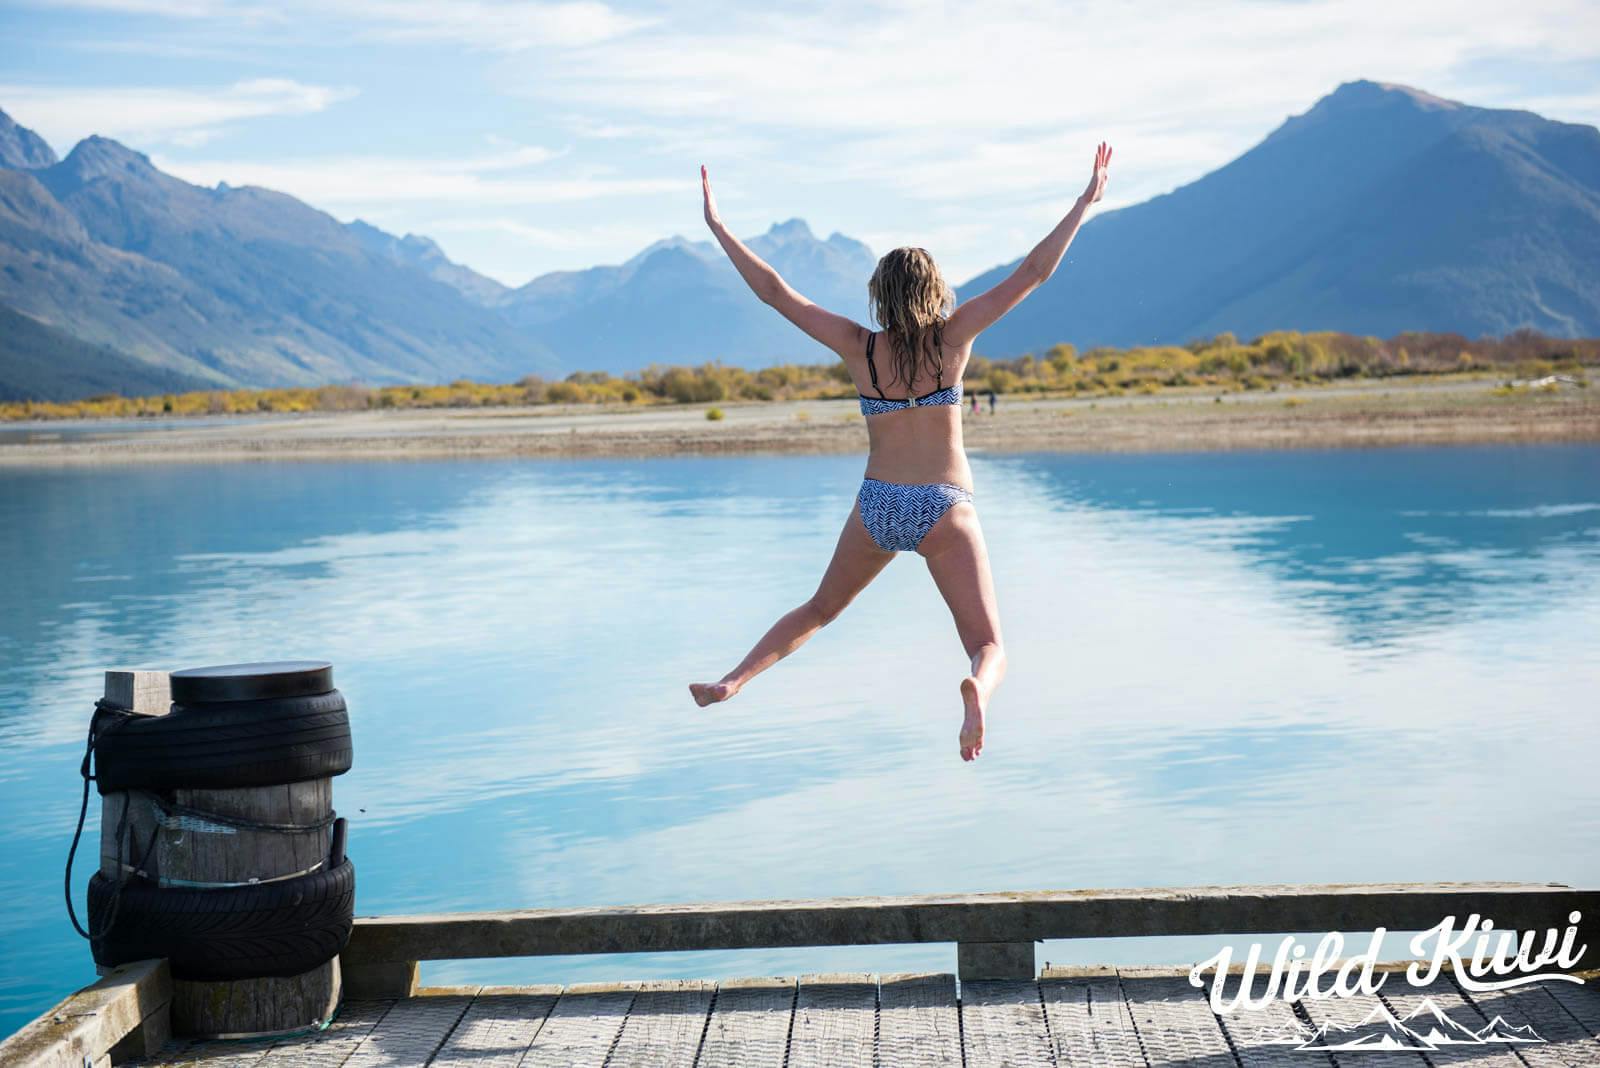 New Zealand adventures that you embrace entirely - Mix things up with different activities